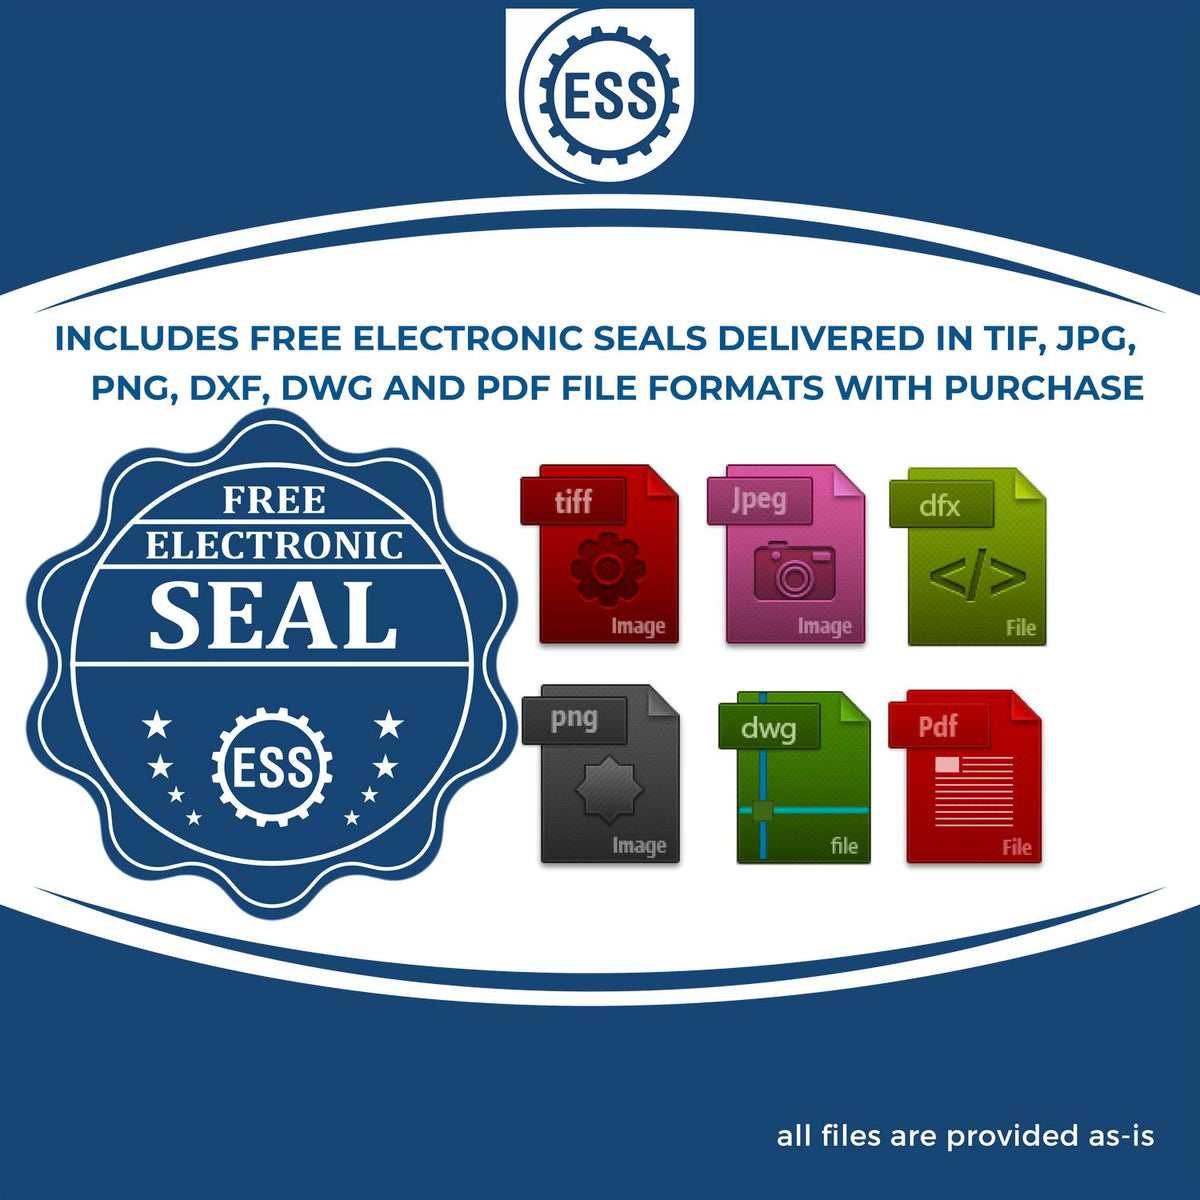 An infographic for the free electronic seal for the Soft South Carolina Professional Engineer Seal illustrating the different file type icons such as DXF, DWG, TIF, JPG and PNG.